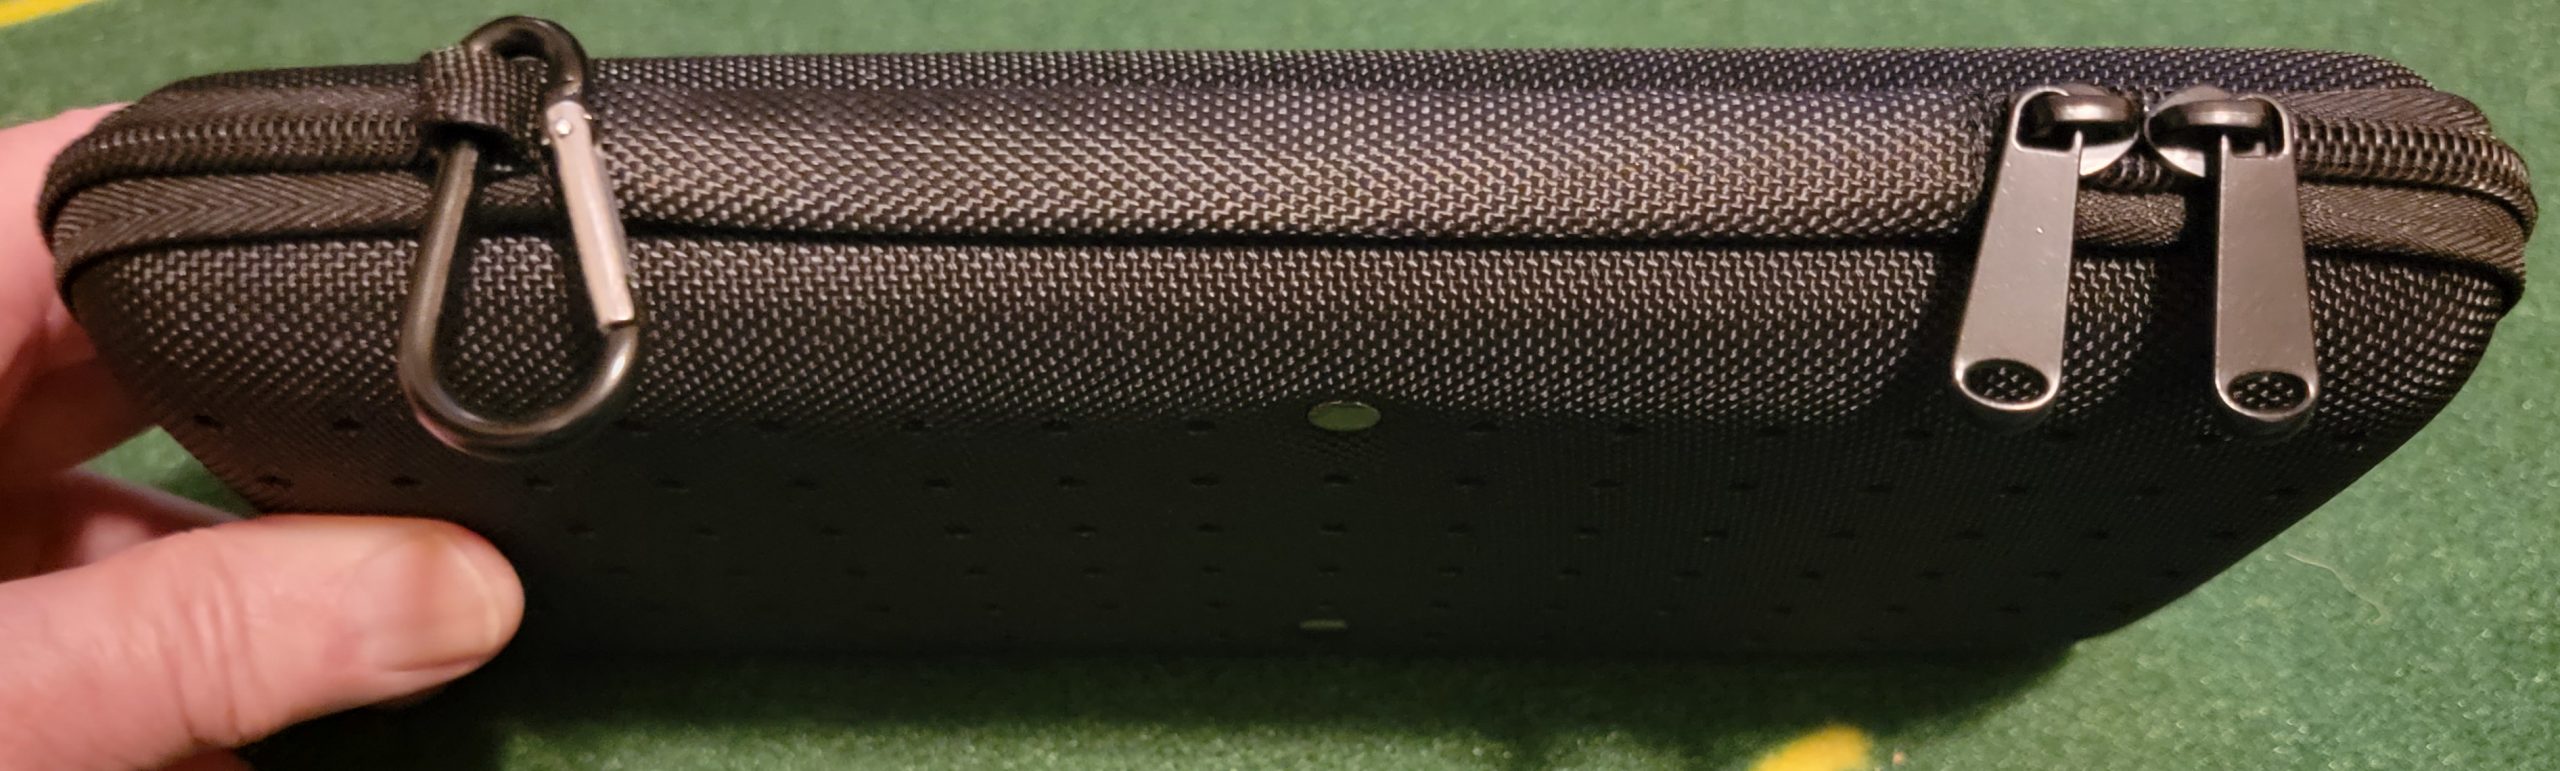 Old Duffer Golf image of a golf accessory case with carabiner and dual zippers